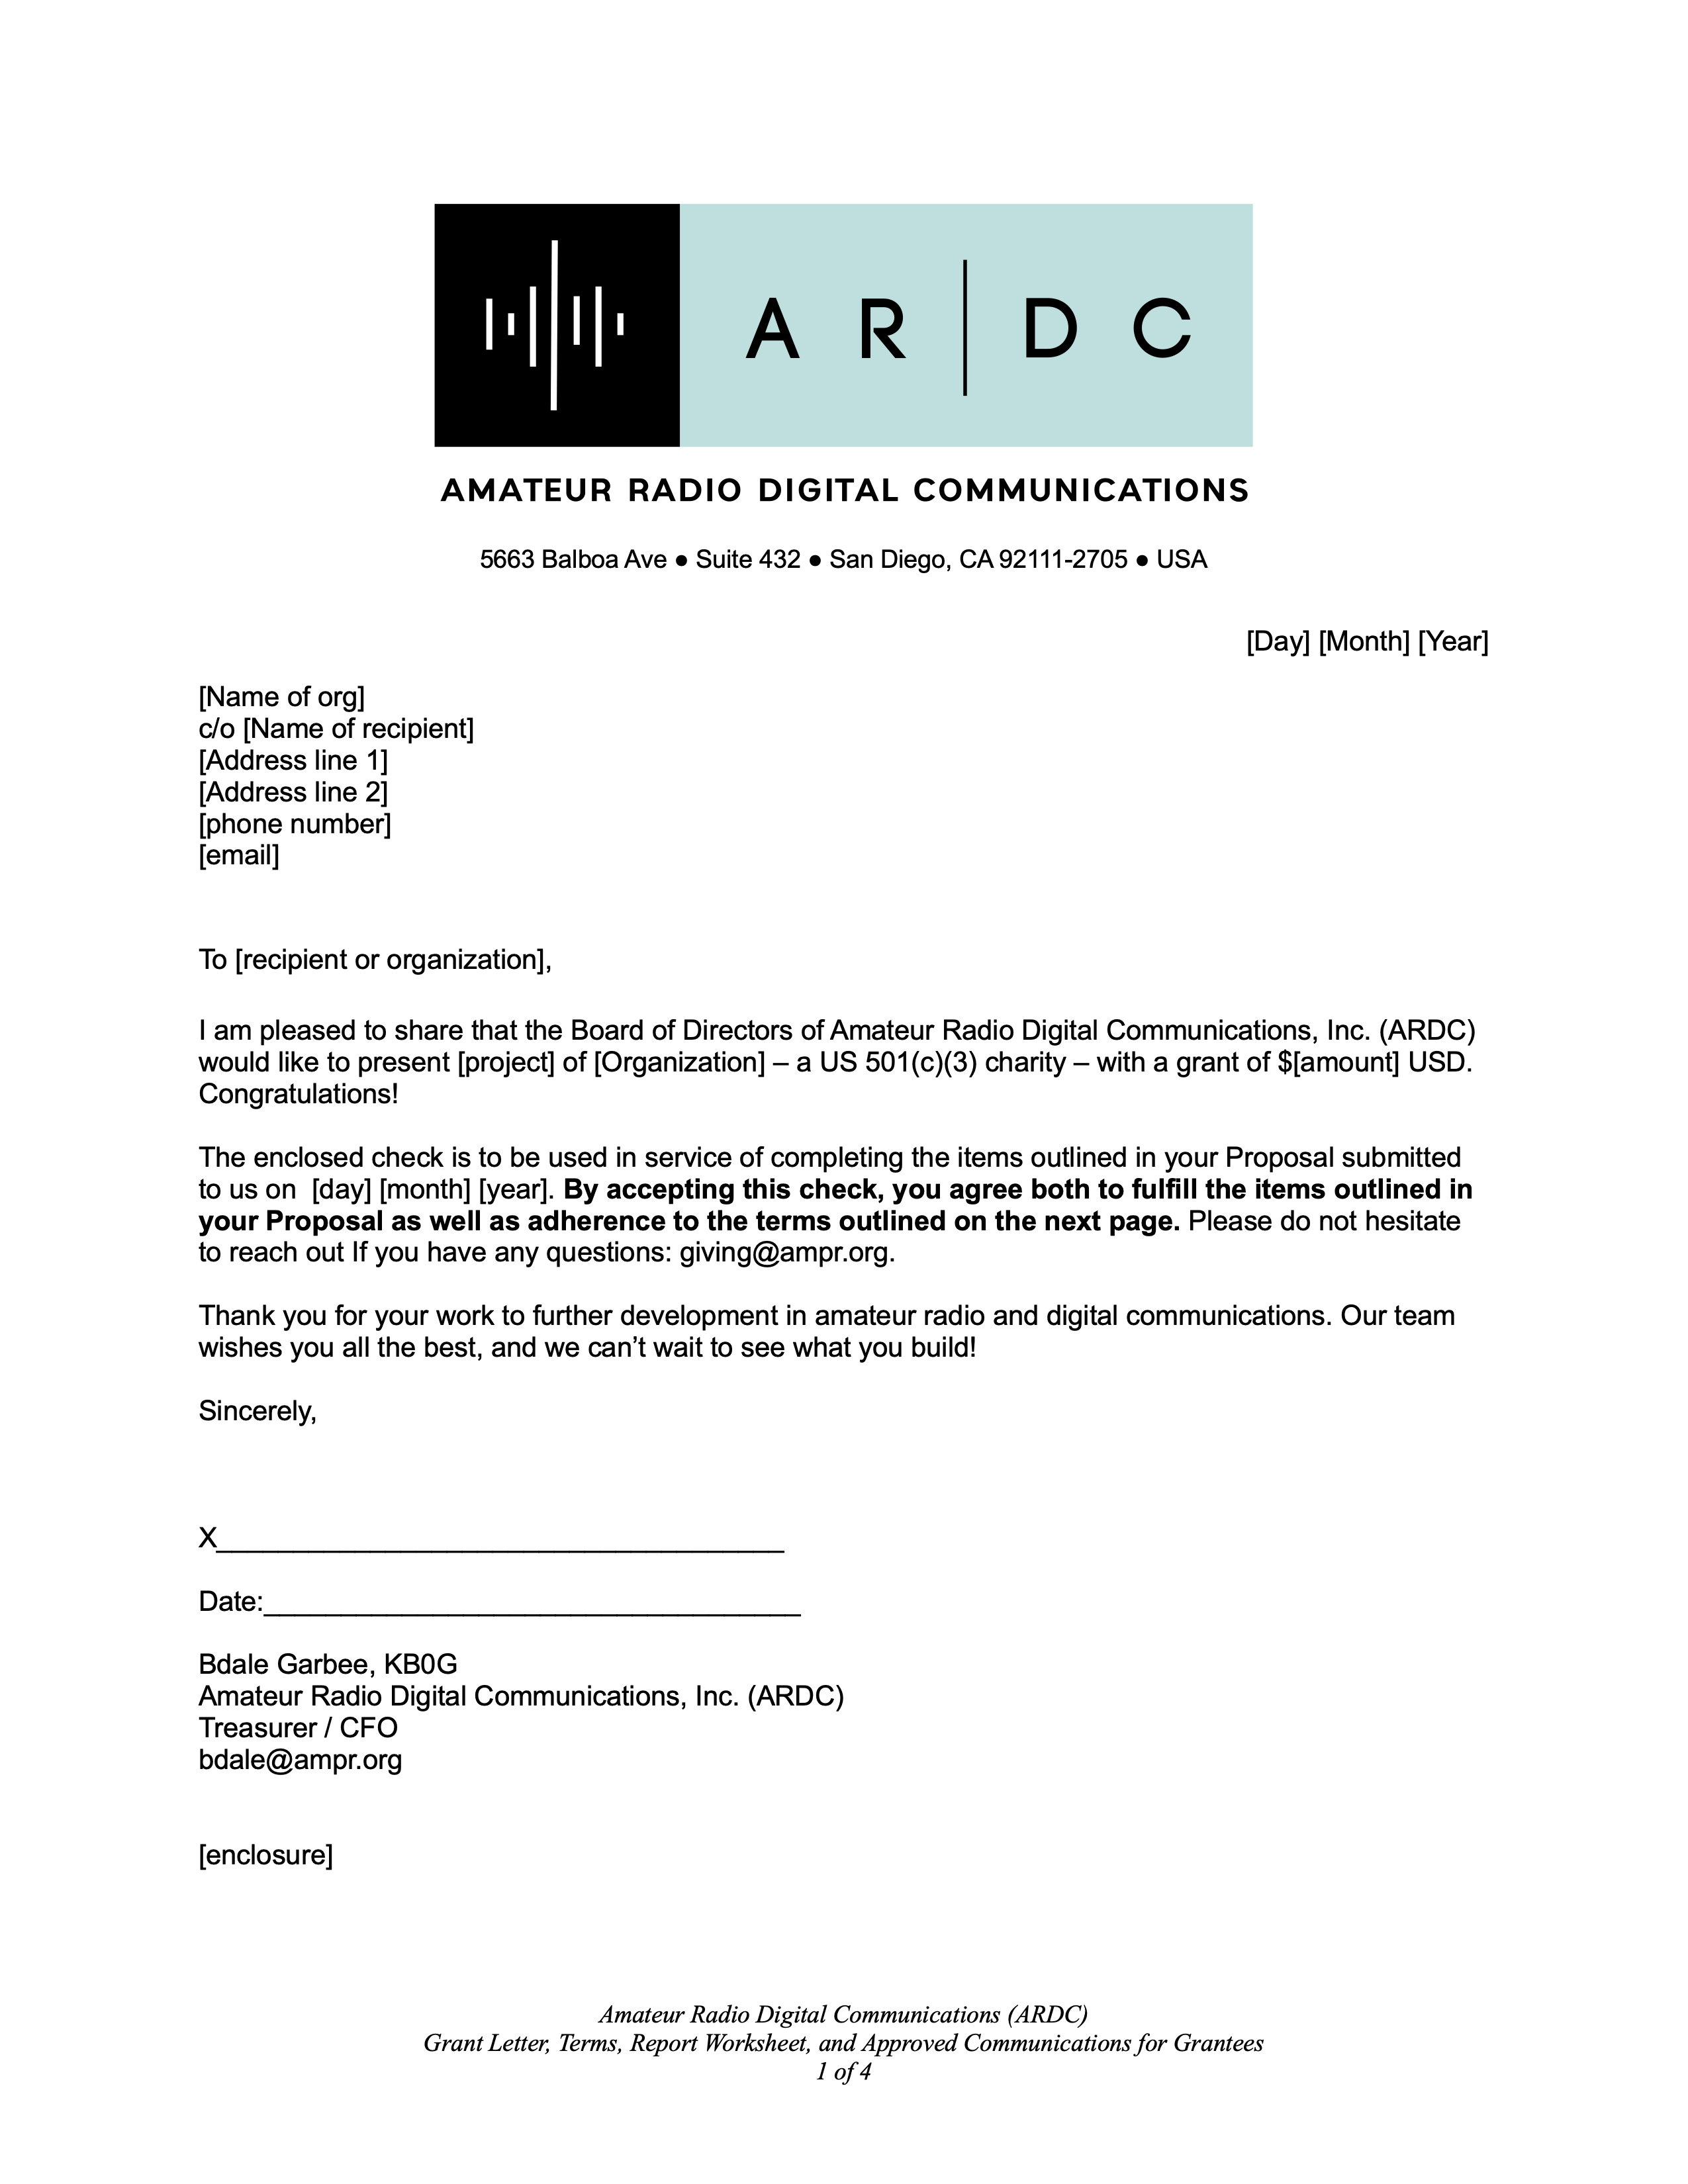 Example of an Amateur Radio Digital Communications (ARDC) grant award letter